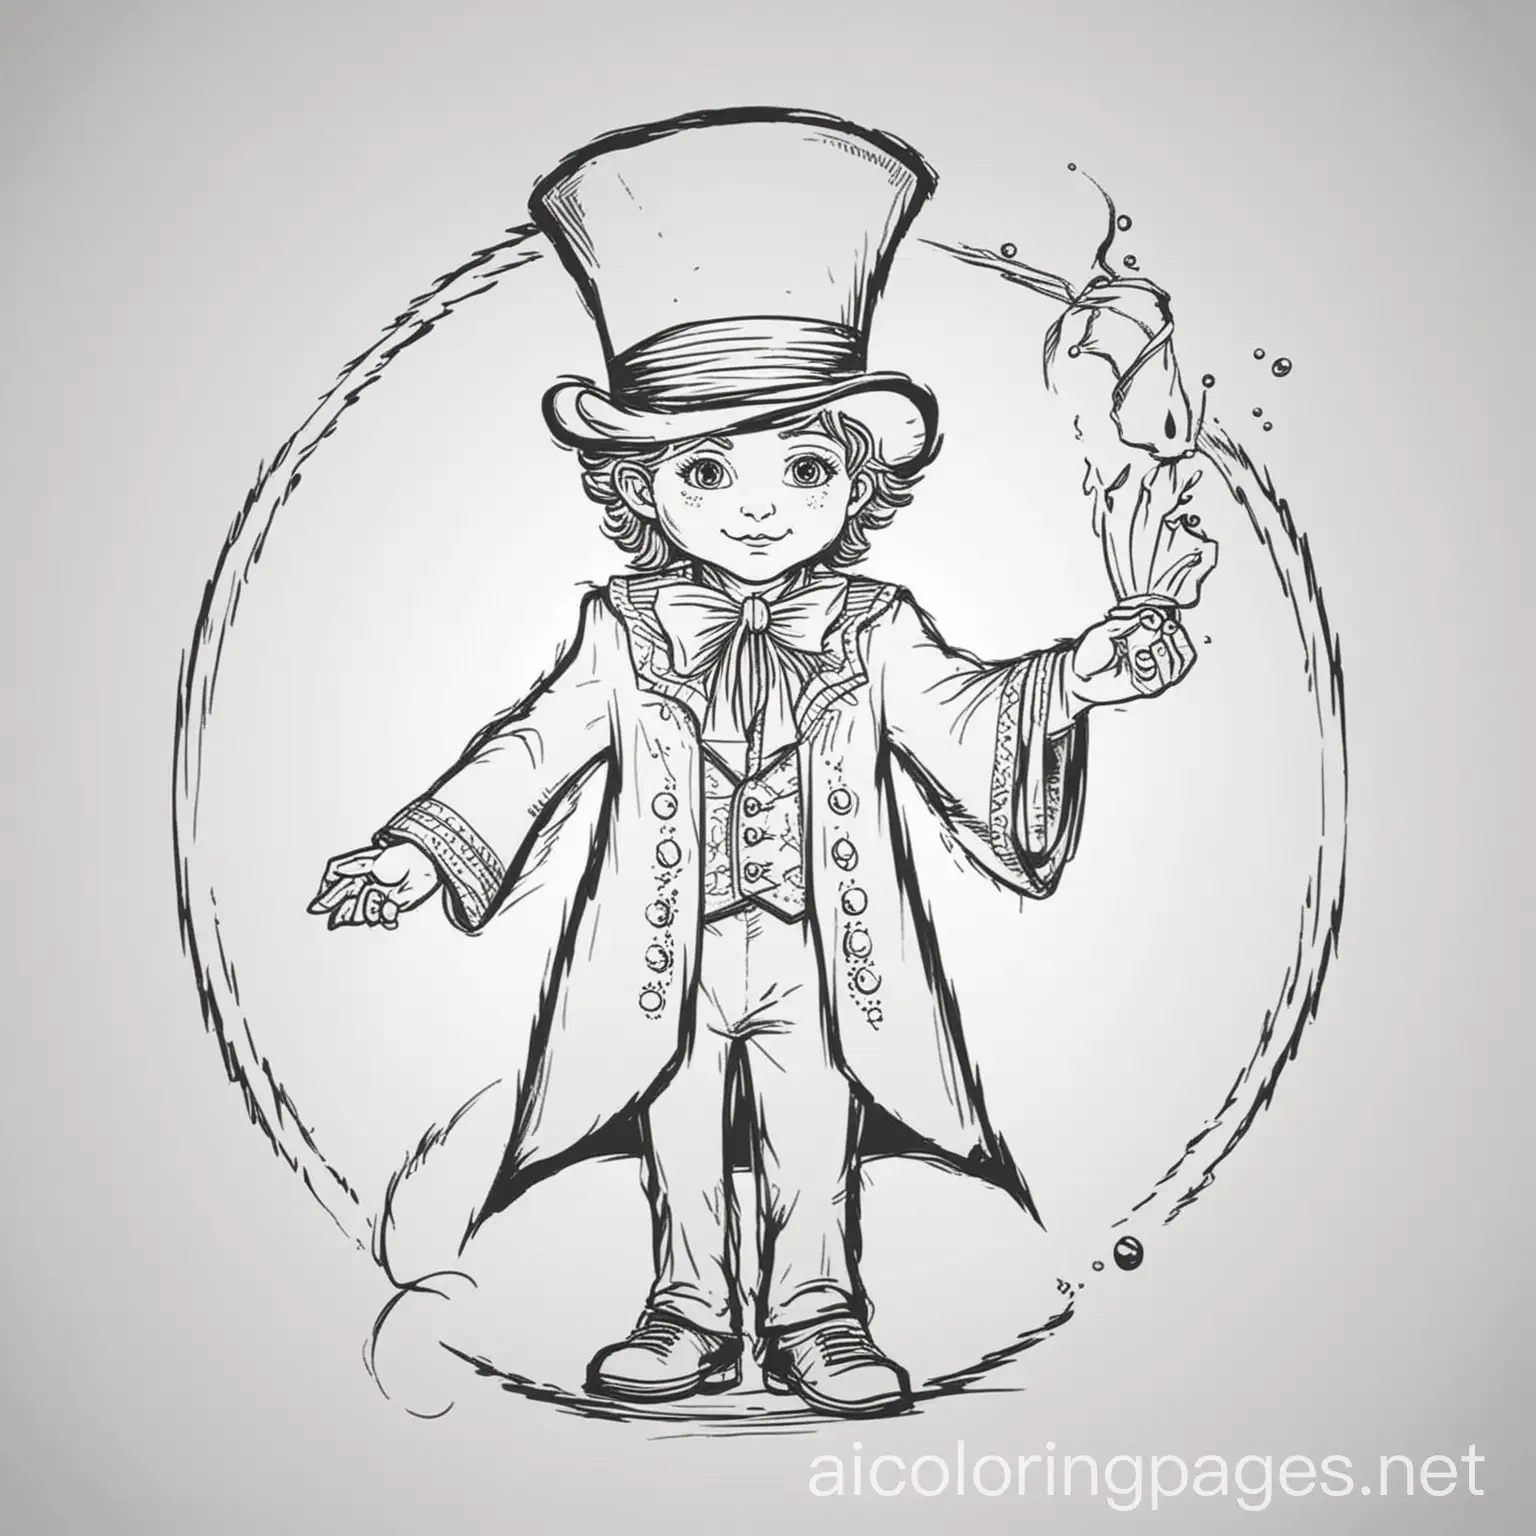 Magician
, Coloring Page, black and white, line art, white background, Simplicity, Ample White Space. The background of the coloring page is plain white to make it easy for young children to color within the lines. The outlines of all the subjects are easy to distinguish, making it simple for kids to color without too much difficulty